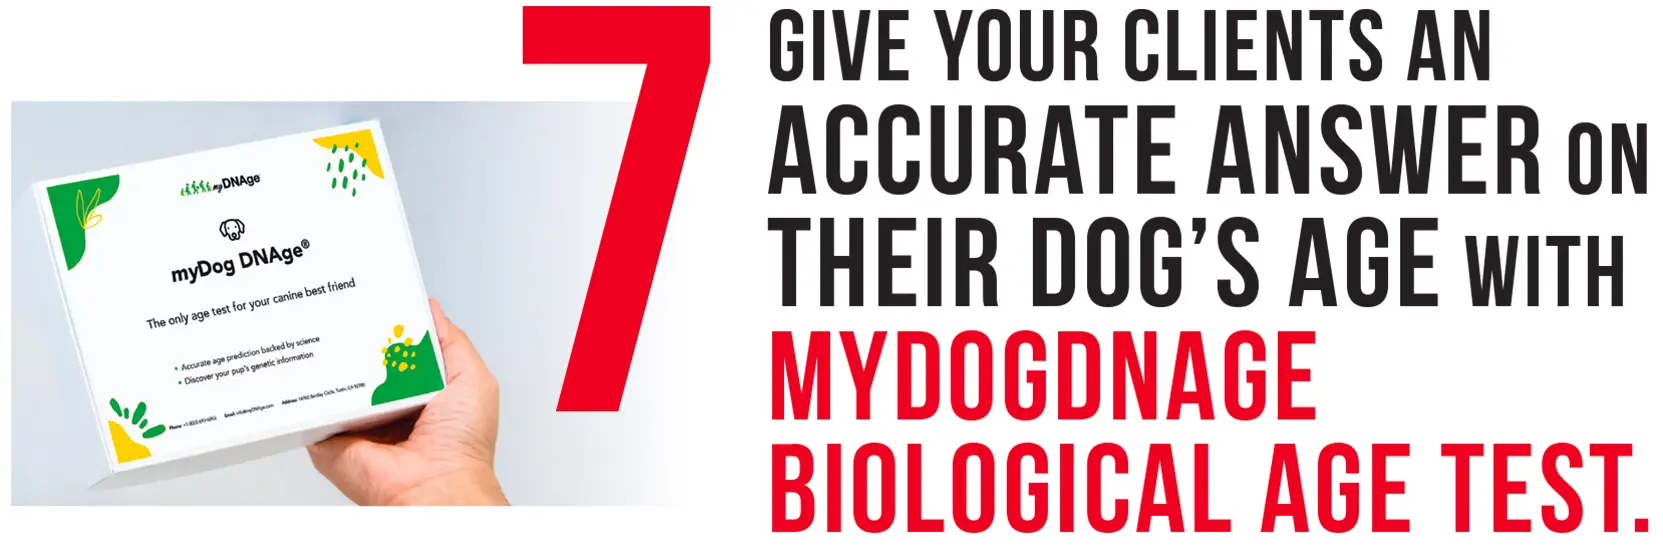 Red numeral 7 with text after that reads Give your clients an accurate answer on their dog's age with Mydogdnage Biological Age Test and next to red numeral 7 is a myDog DNAge kit a person's hand is holding